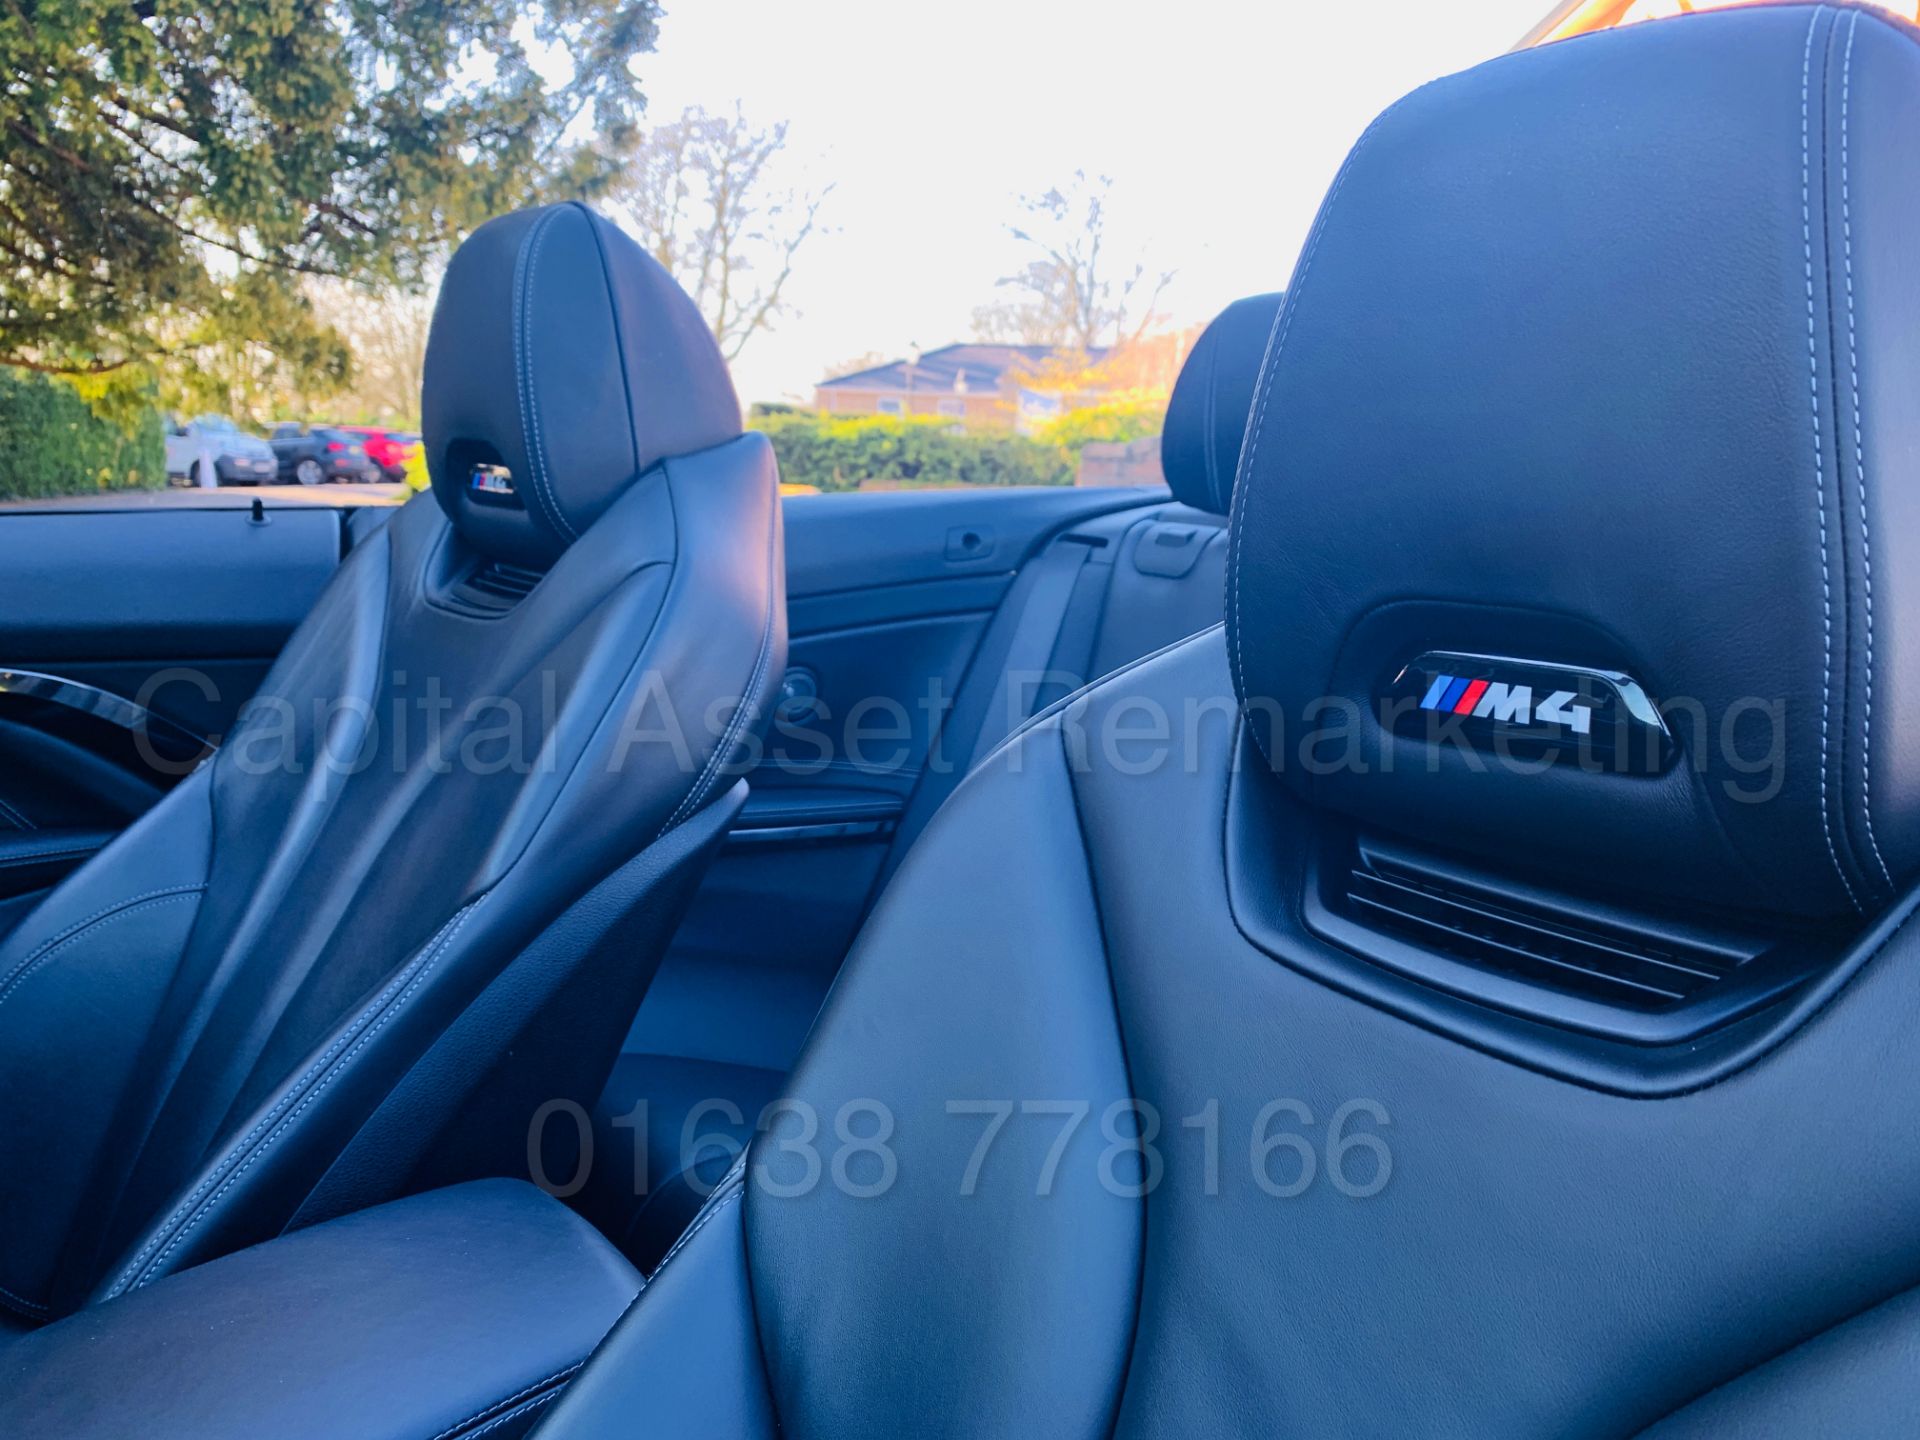 ON SALE BMW M4 CONVERTIBLE *COMPETITION PACKAGE* (2018 MODEL) '431 BHP - M DCT AUTO' WOW!!!!! - Image 49 of 89